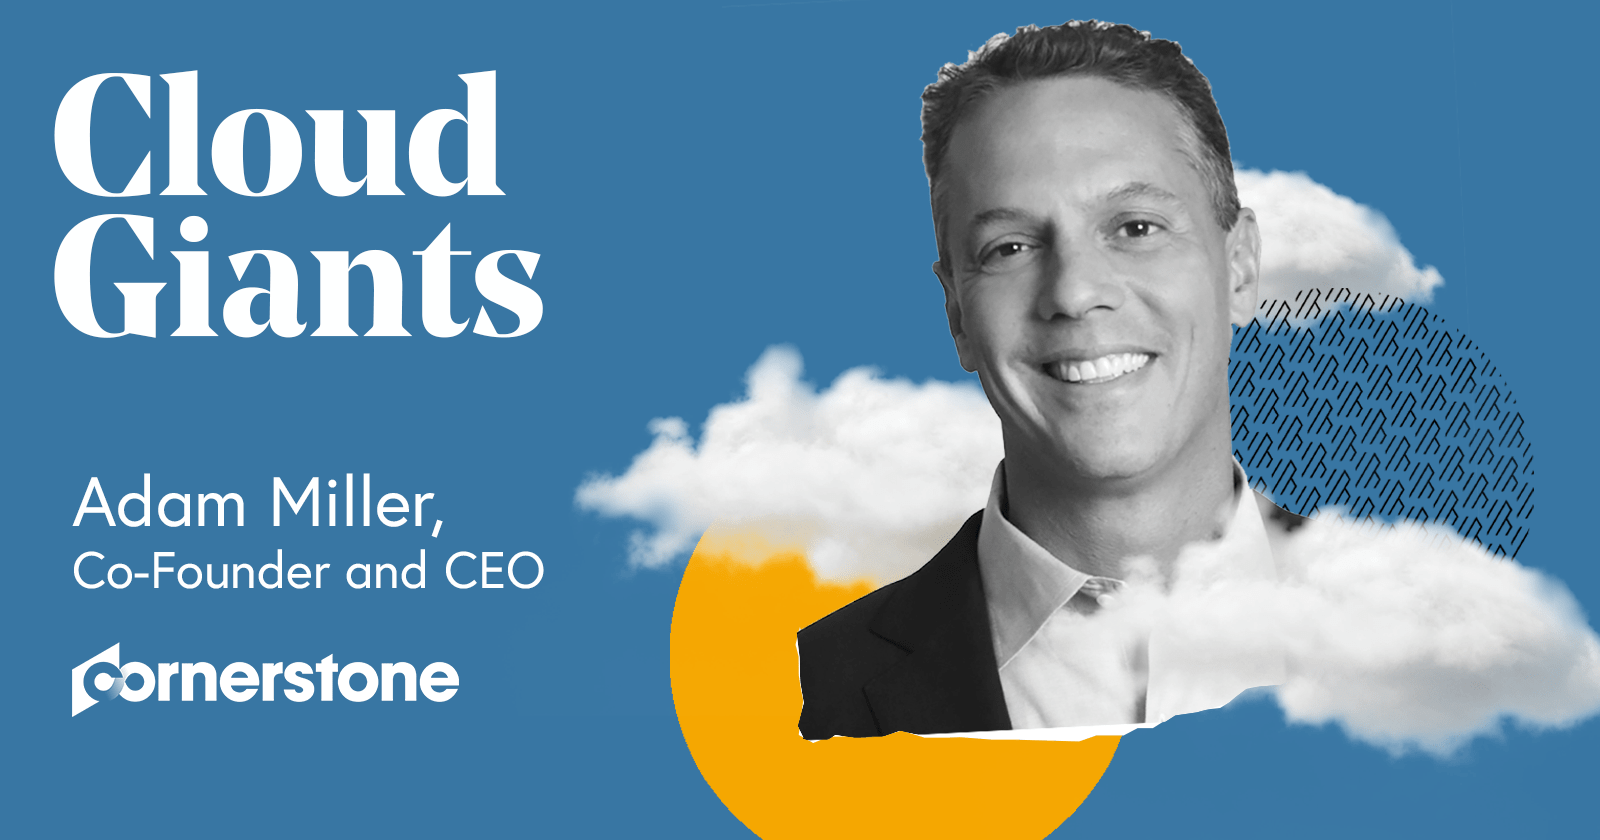 Cloud Giants Adam Miller Co-founder and CEO of Cornerstone onDemand